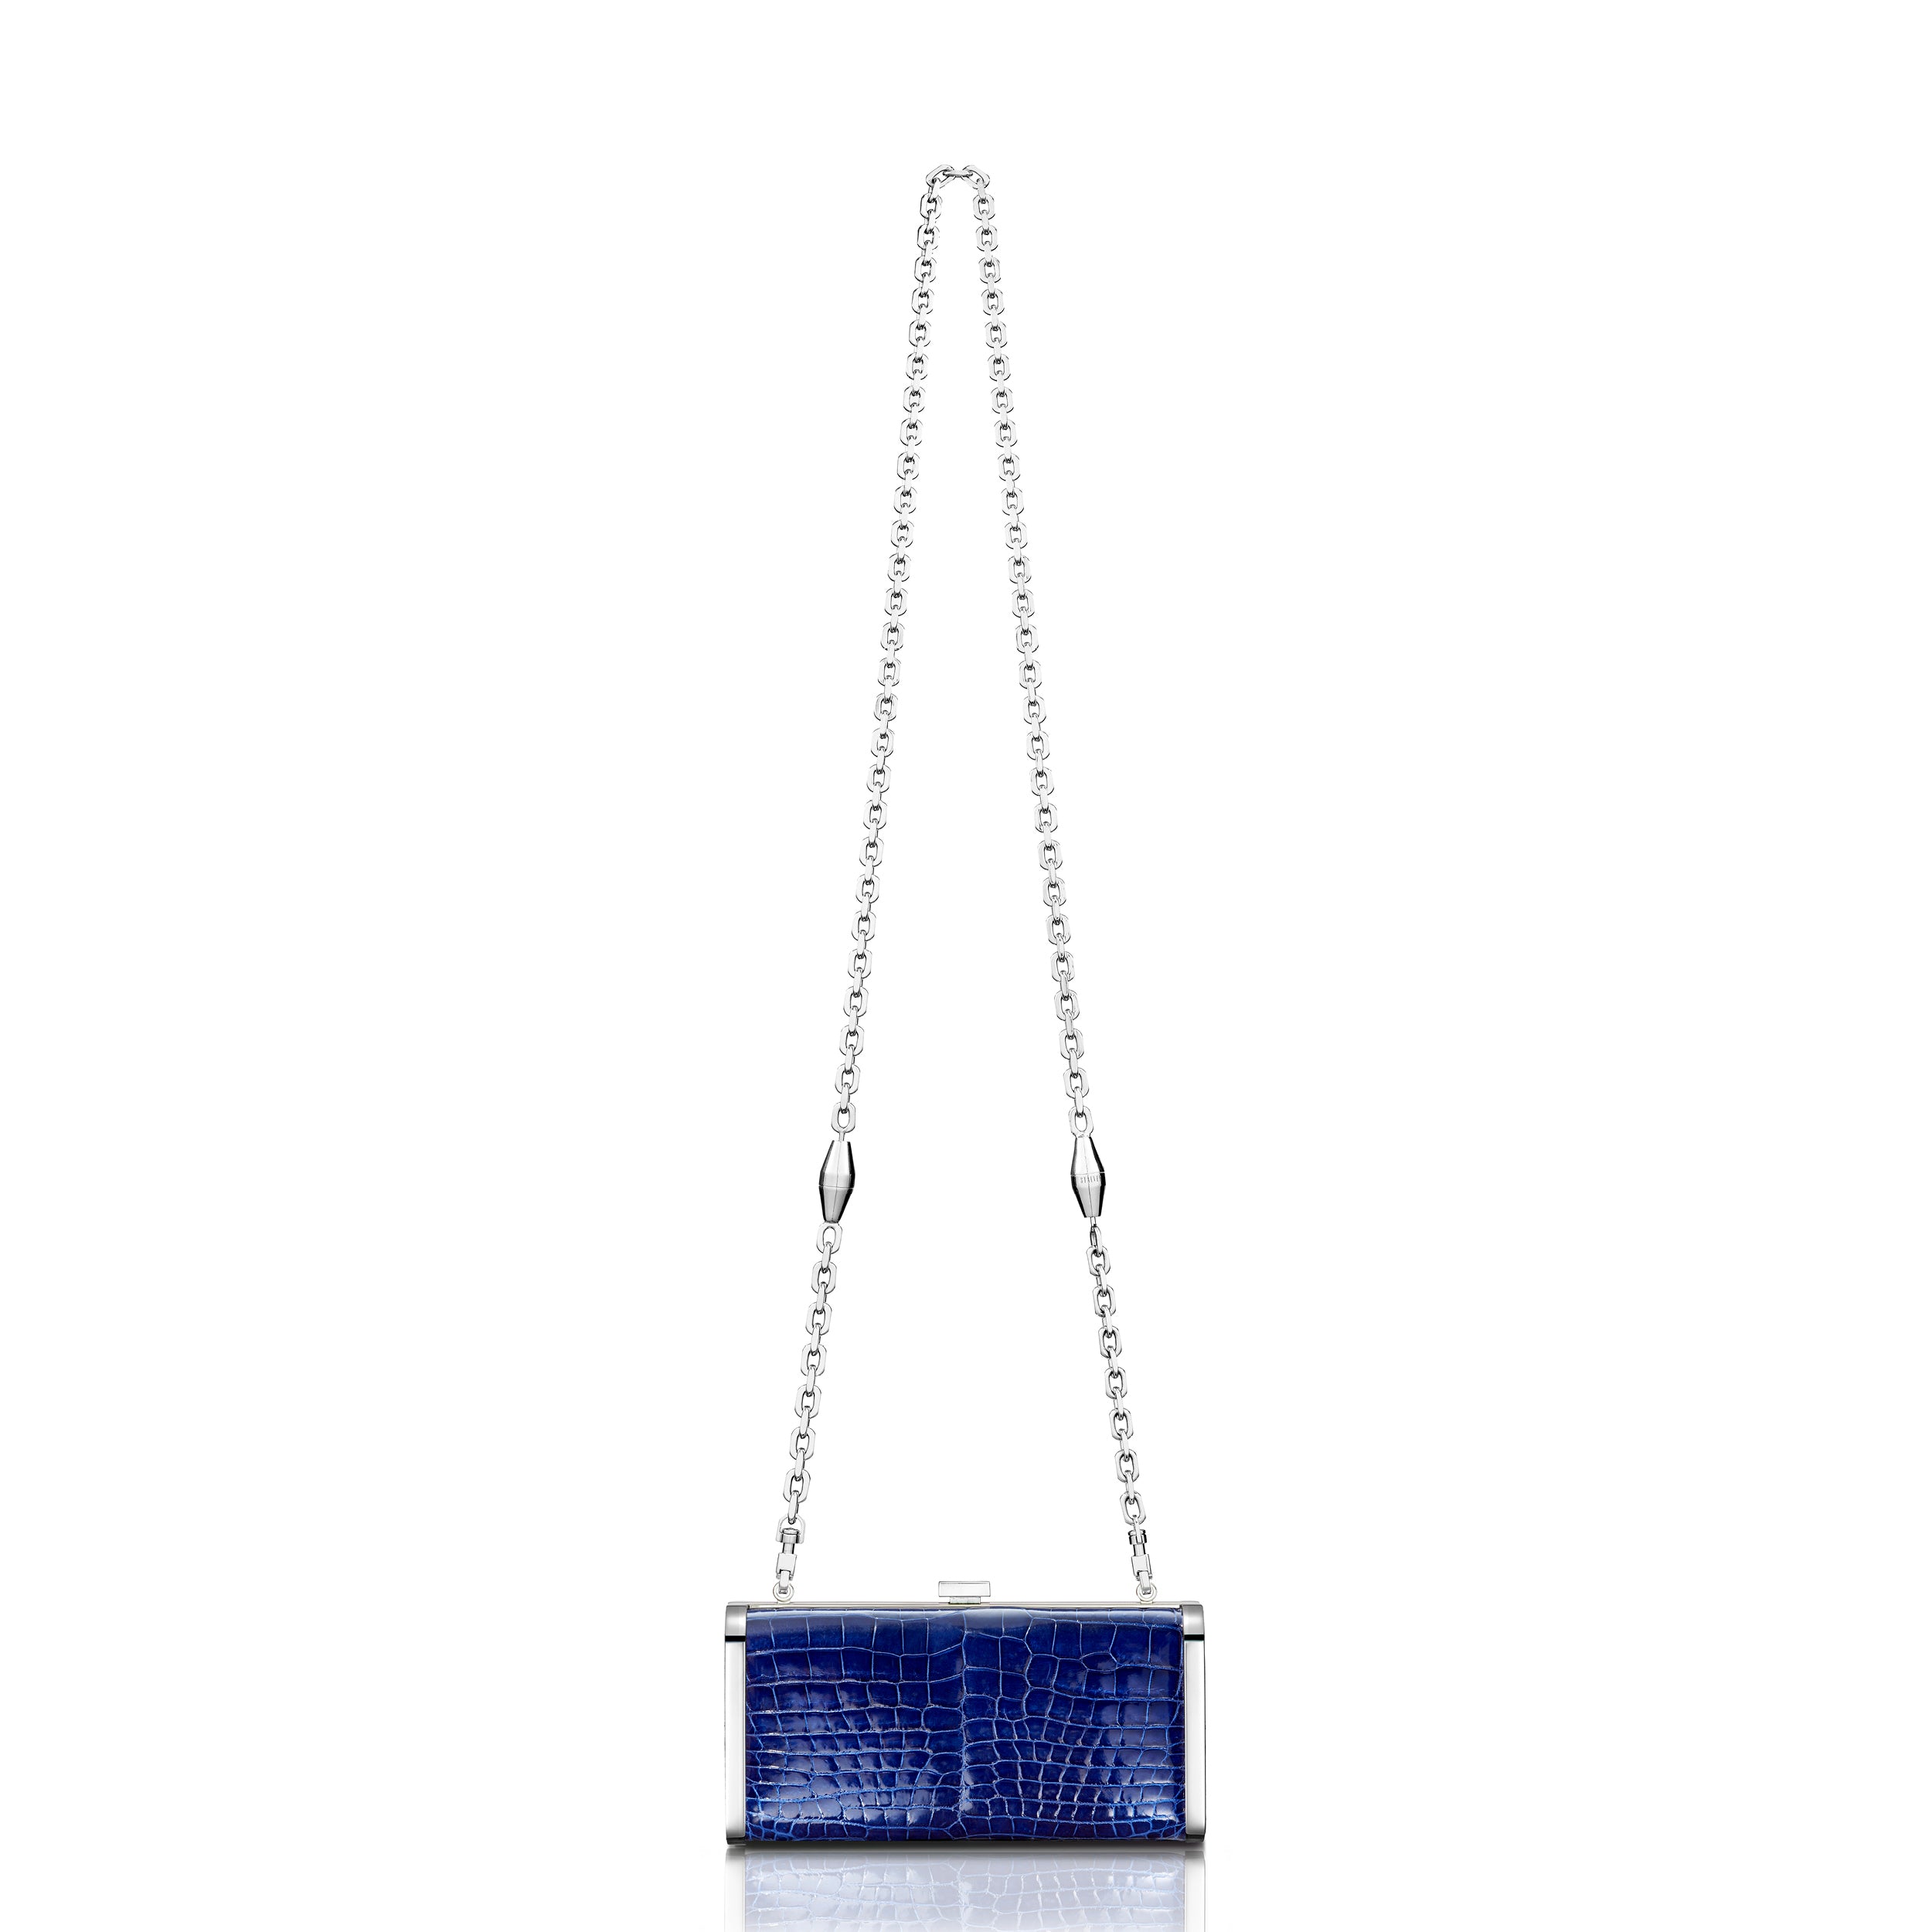 STALVEY Square Clutch in Cobalt Blue Alligator with Palladium Hardware Front View with Chain